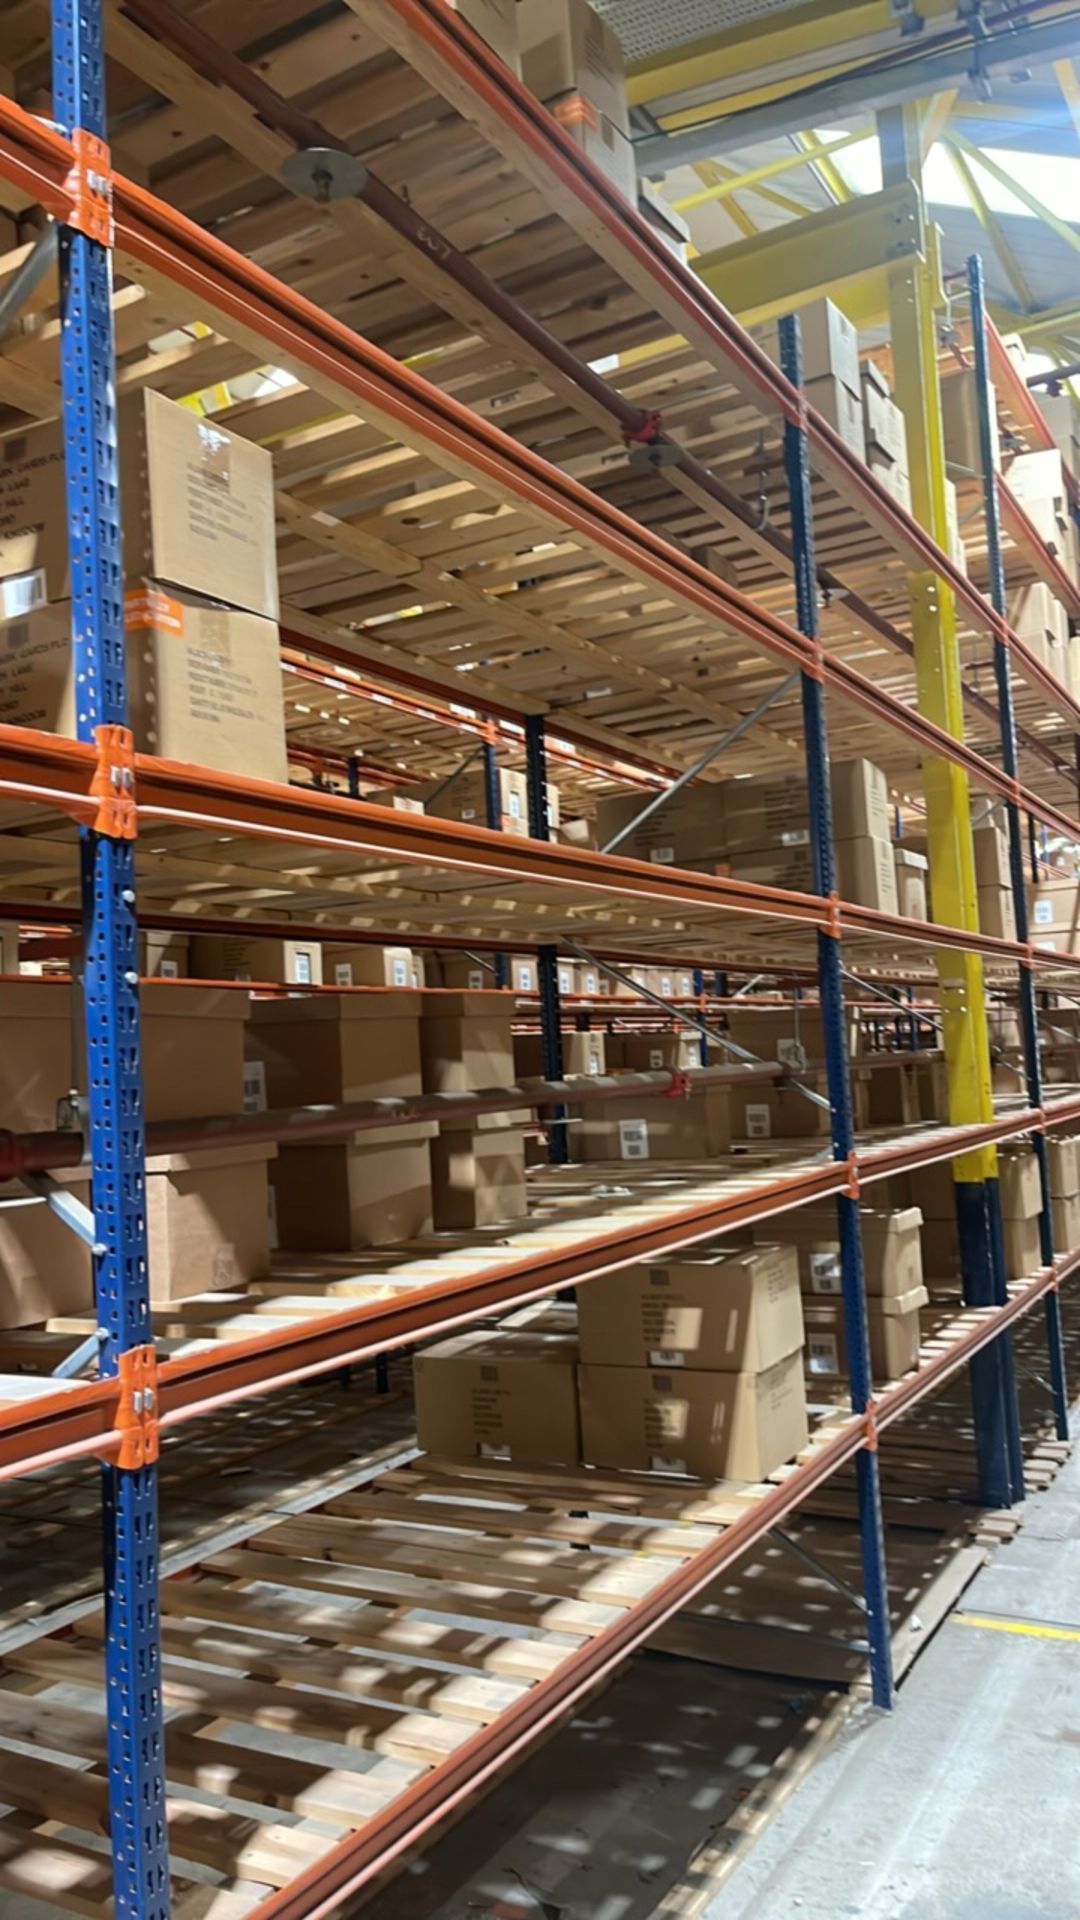 Run Of 10 Bays Of Boltless Industrial Pallet Racking - Image 8 of 10